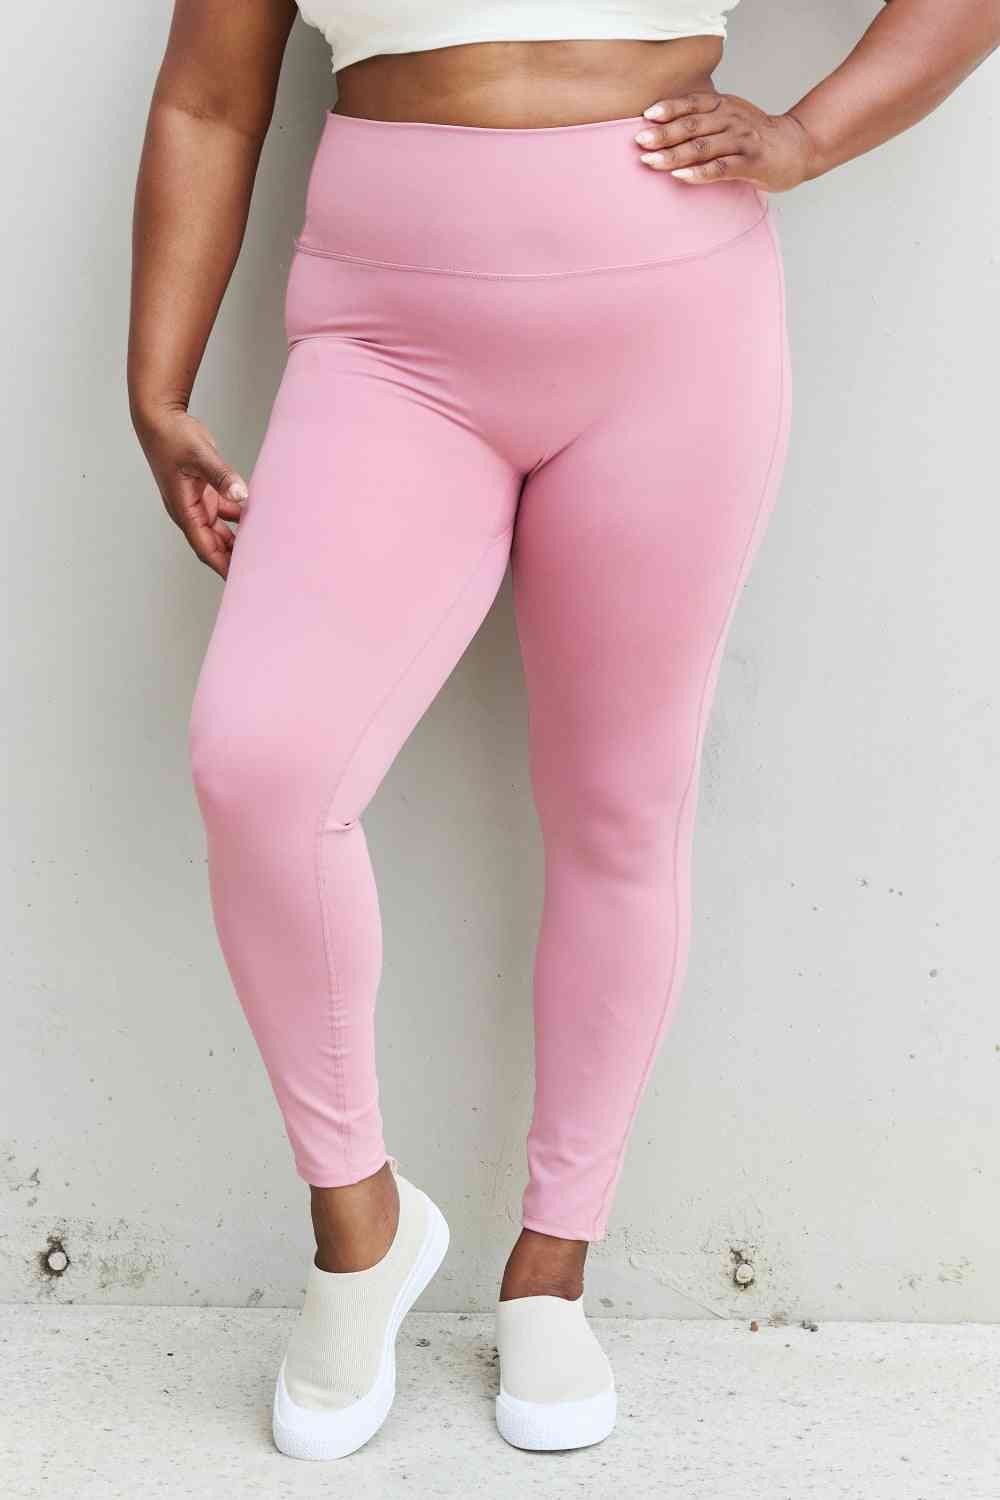 Zenana Fit For You Full Size High Waist Active Leggings in Light Rose - Sufyaa